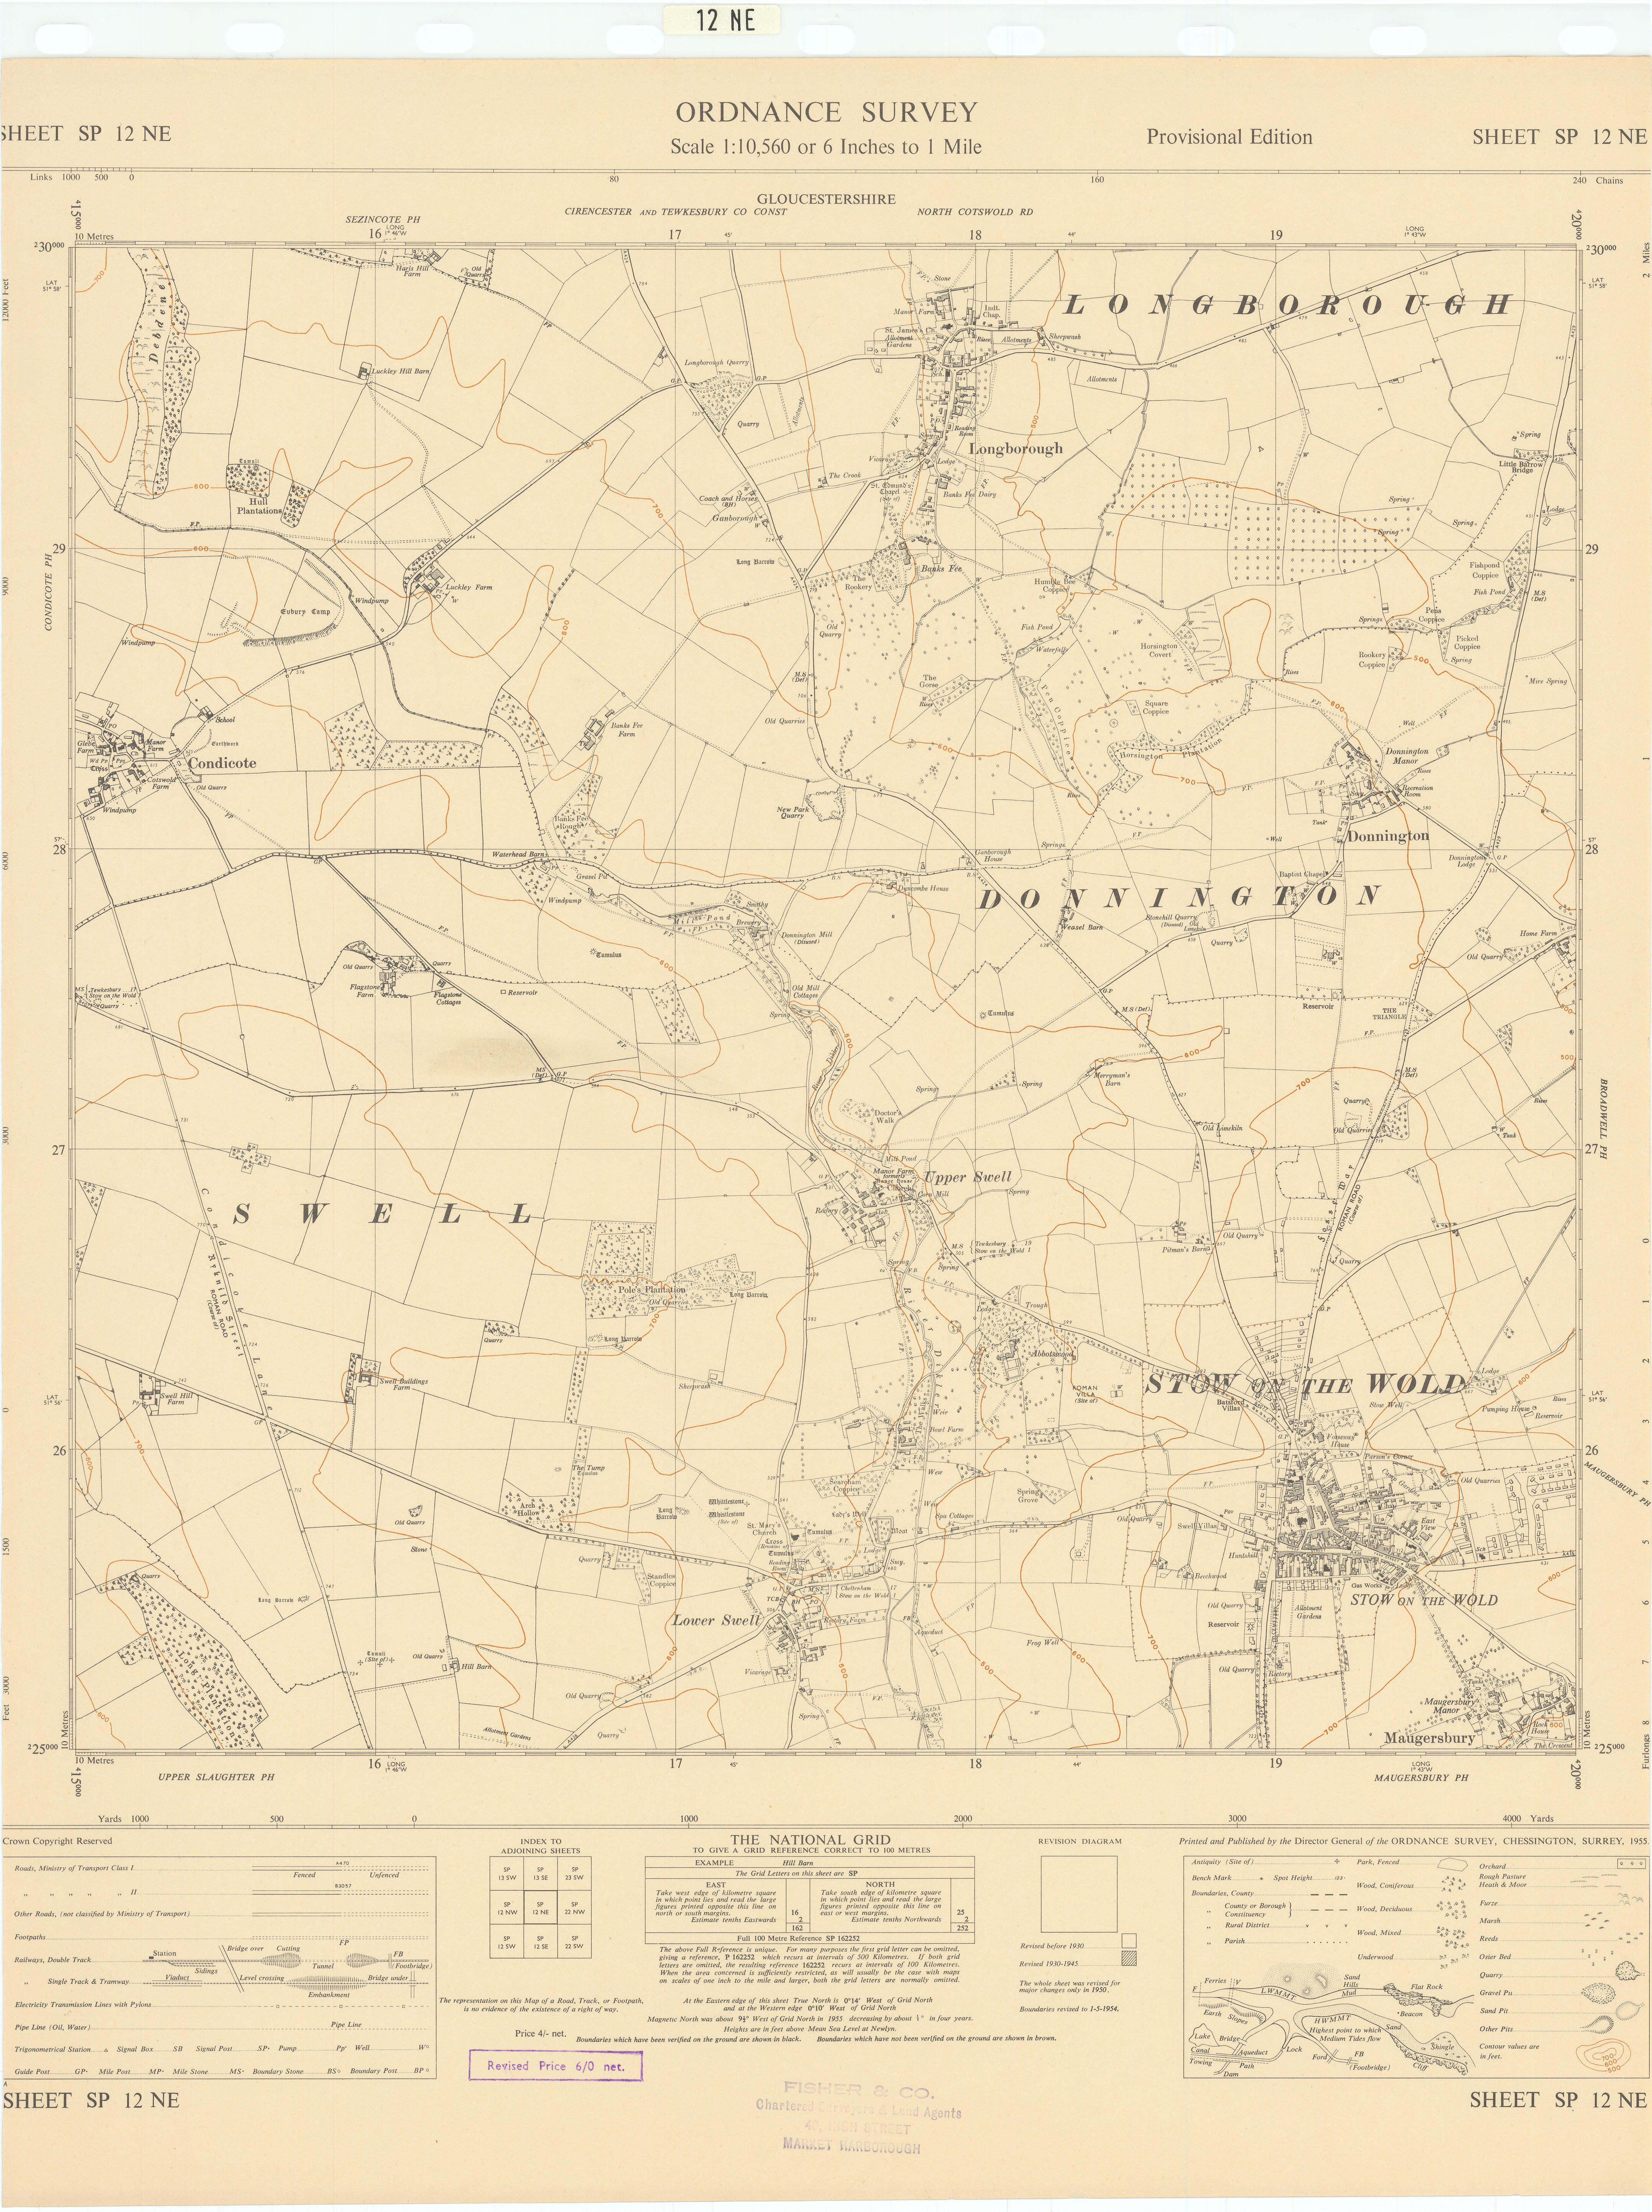 Ordnance Survey SP12NE Cotswolds Stow-on-the-Wold Longborough Swell 1955 map